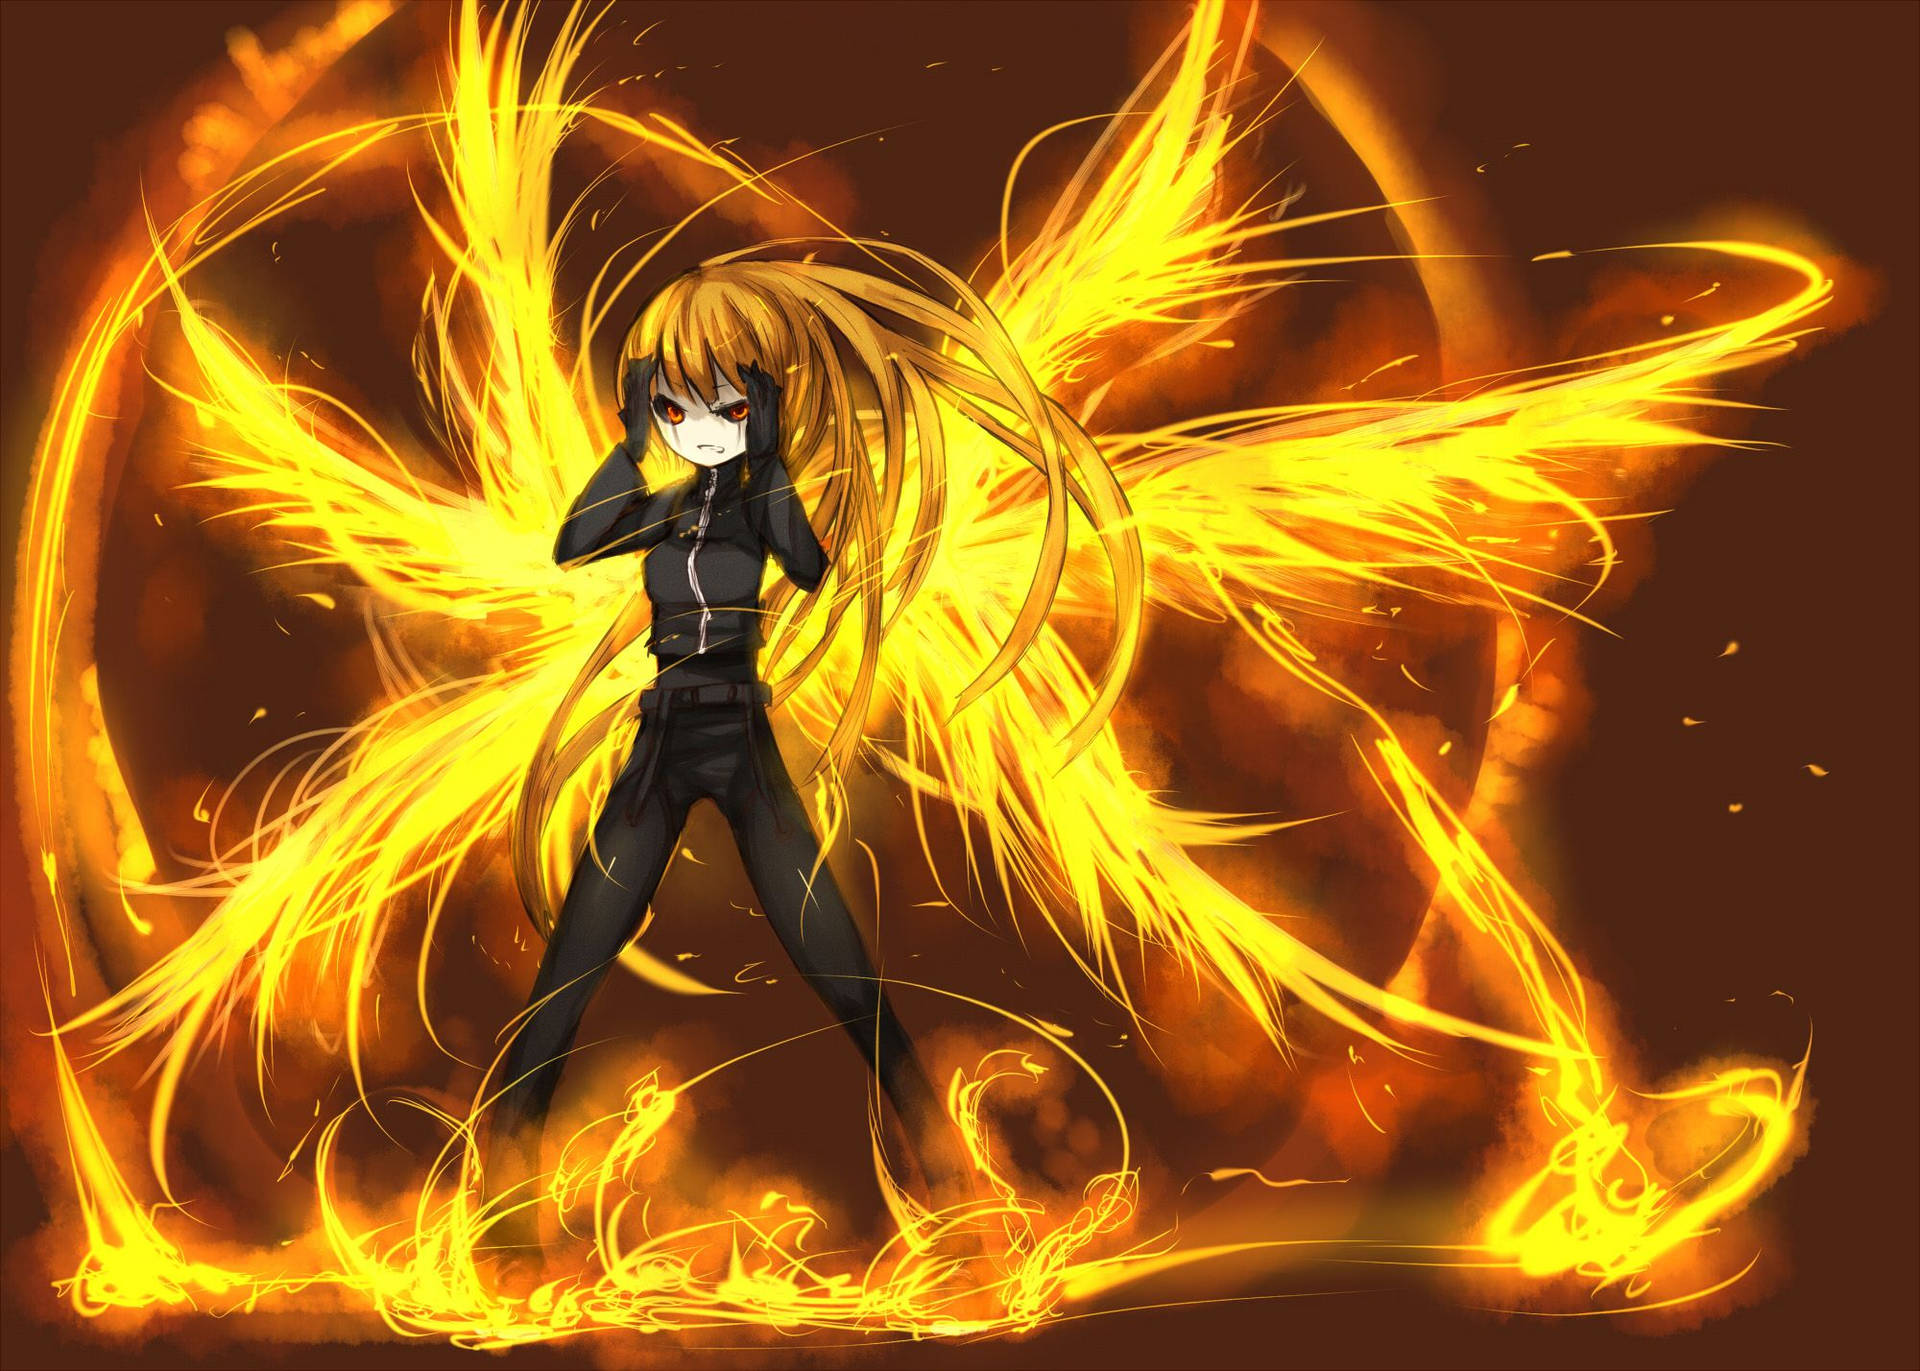 Flaming Wings Over The City Background